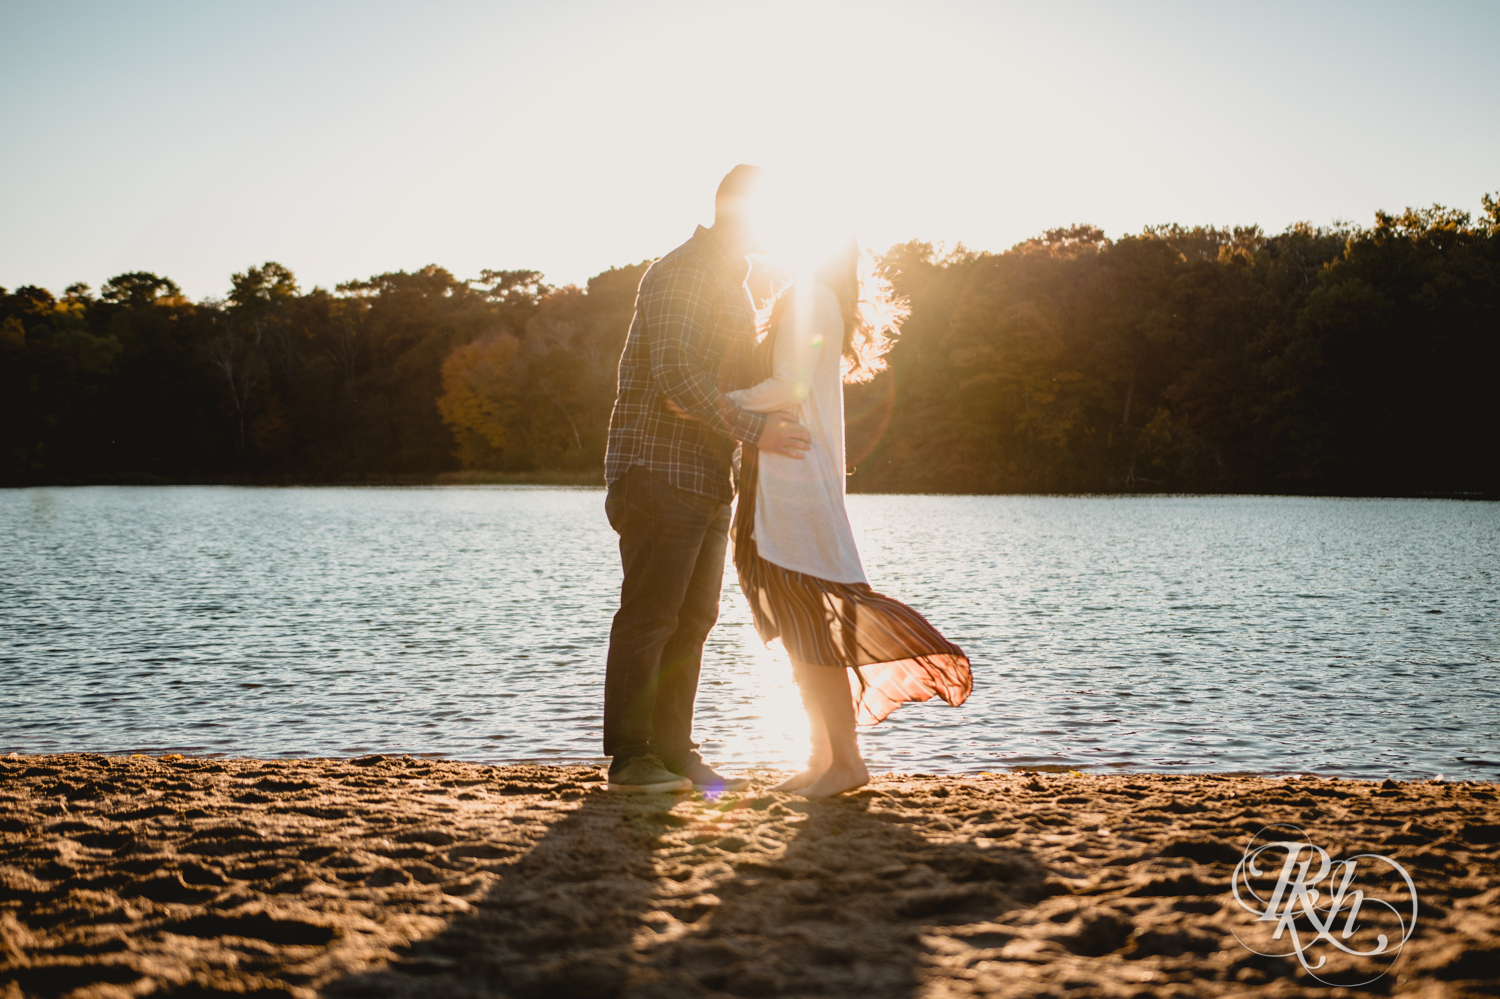 Man and woman kiss on beach during golden hour engagement photos at Lebanon Hills in Eagan, Minnesota.